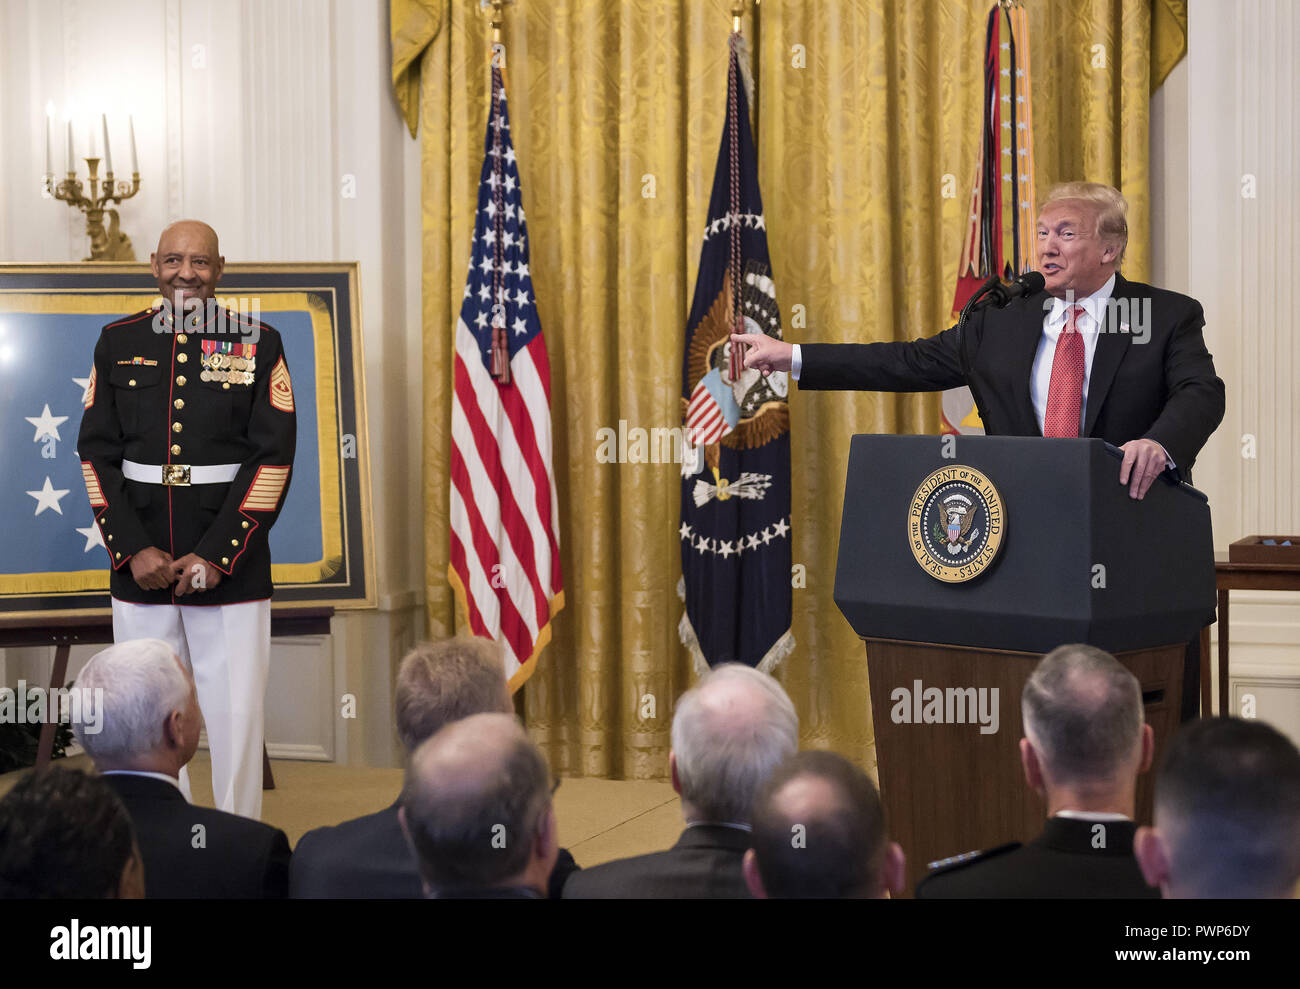 Washington, District of Columbia, USA. 17th Oct, 2018. Credit: Chip Somodevilla/Pool via CNPUnited States President Donald J. Trump awards the Medal of Honor to Sergeant Major John L. Canley, United States Marine Corps (Retired), for conspicuous gallantry during the Vietnam War in a ceremony in the East Room of the the White House in Washington, DC on Wednesday, October 17, 2018 Credit: Ron Sachs/CNP/ZUMA Wire/Alamy Live News Stock Photo